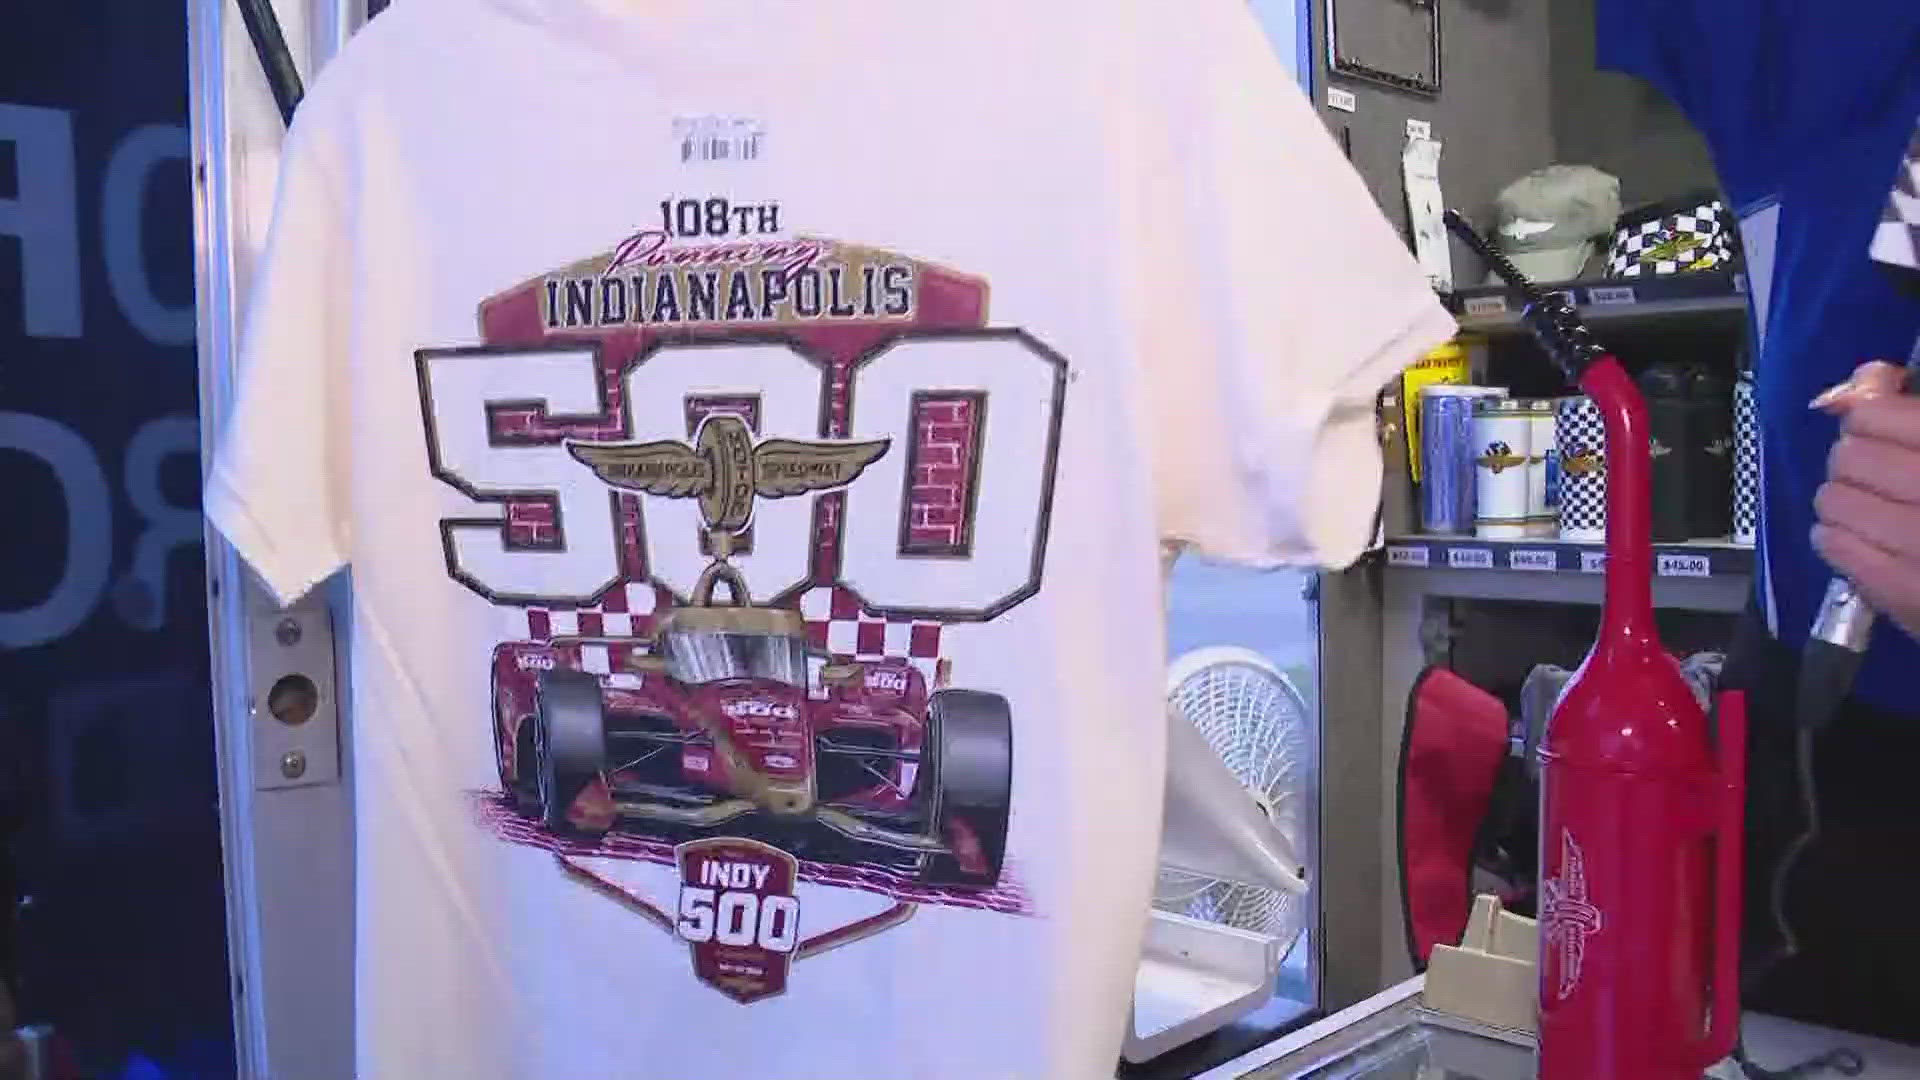 Lauren and Samantha are at the merch truck near Gate One to give us a look at some of the newest merch for this year's 108th running of the Indianapolis 500.